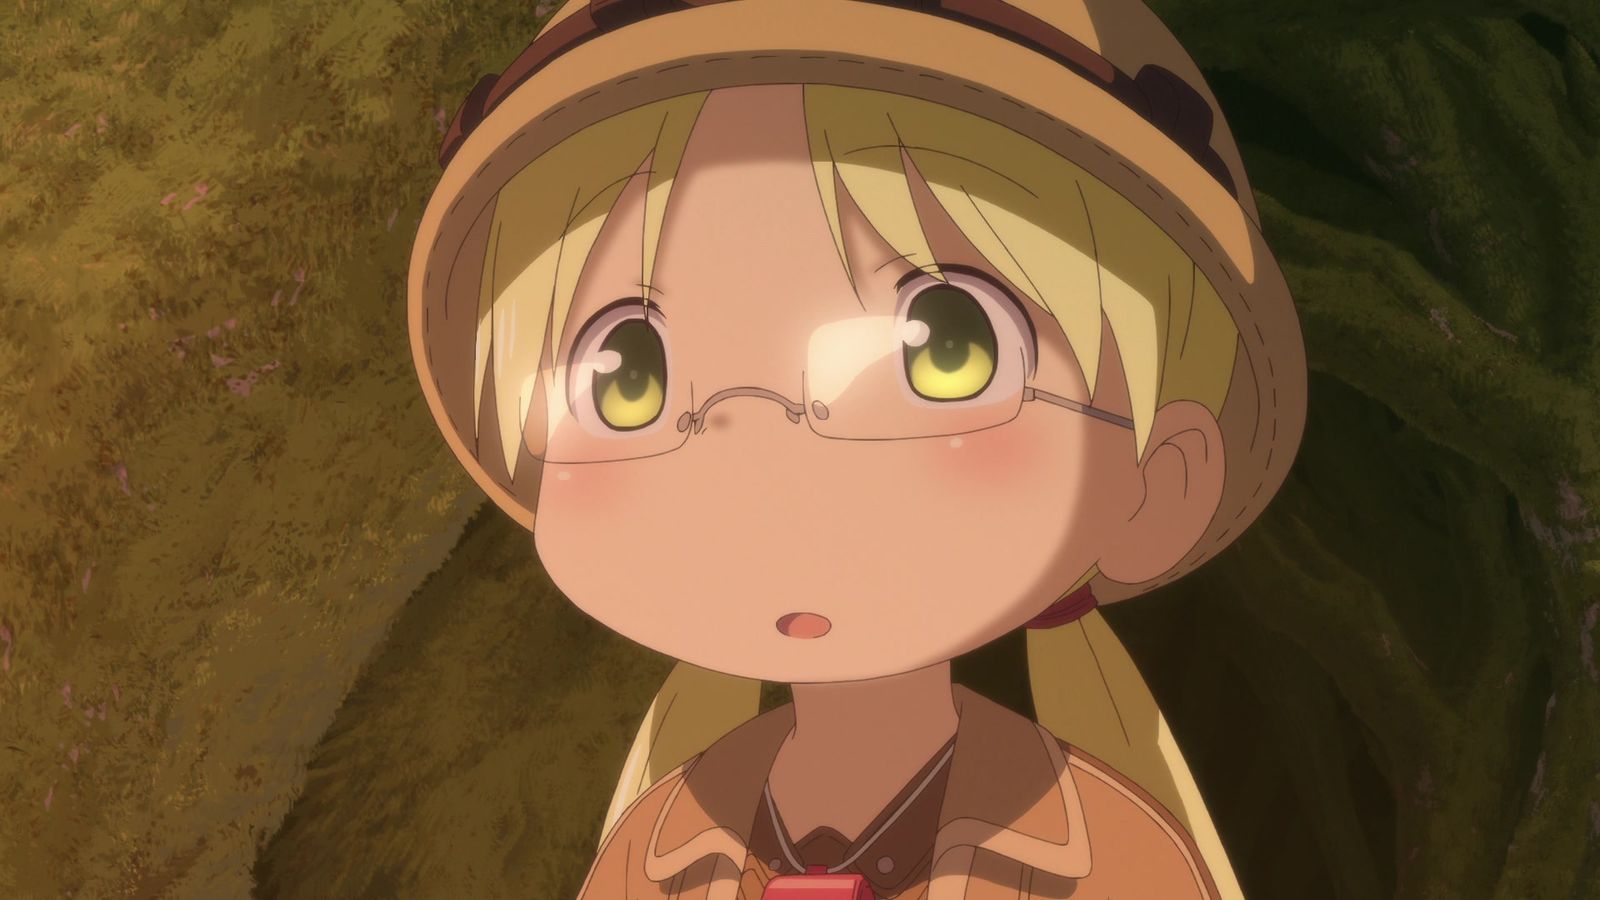 Where to Watch Made in Abyss Series and Movies: Crunchyroll, Netflix, Amazon Prime -Is Made in Abyss Series and Movies on Crunchyroll?